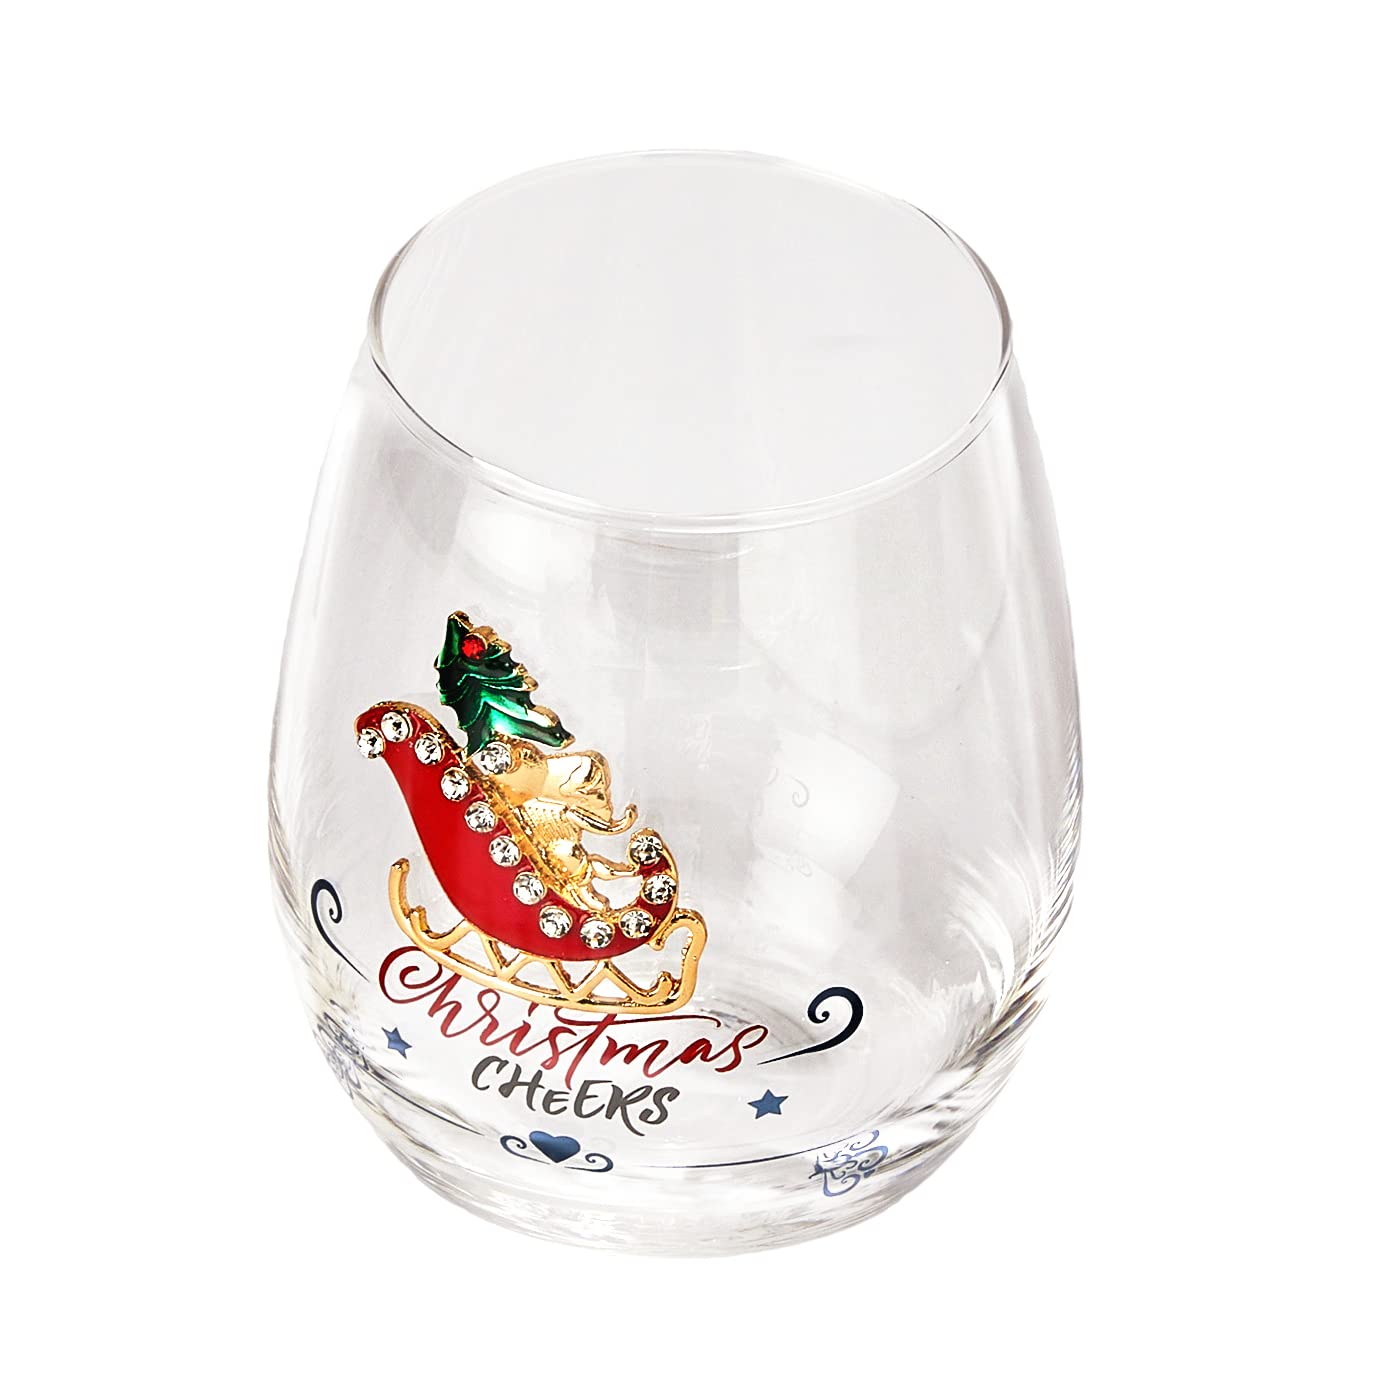 Sleigh All Day Stemless Wine Glasses, Set of 2 – Cambridge